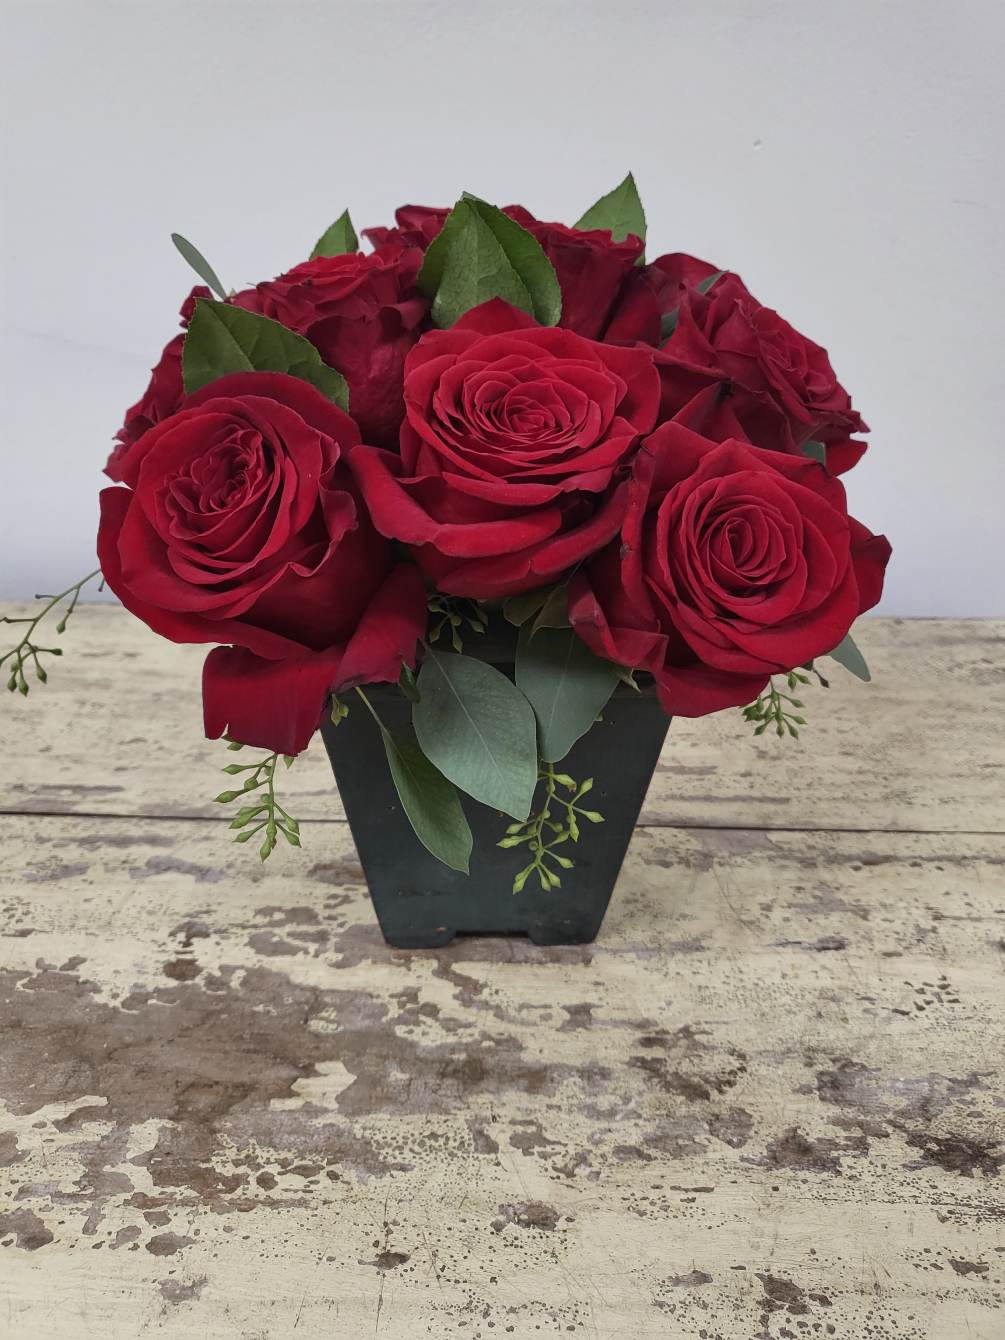 A beautiful arrangement of red roses